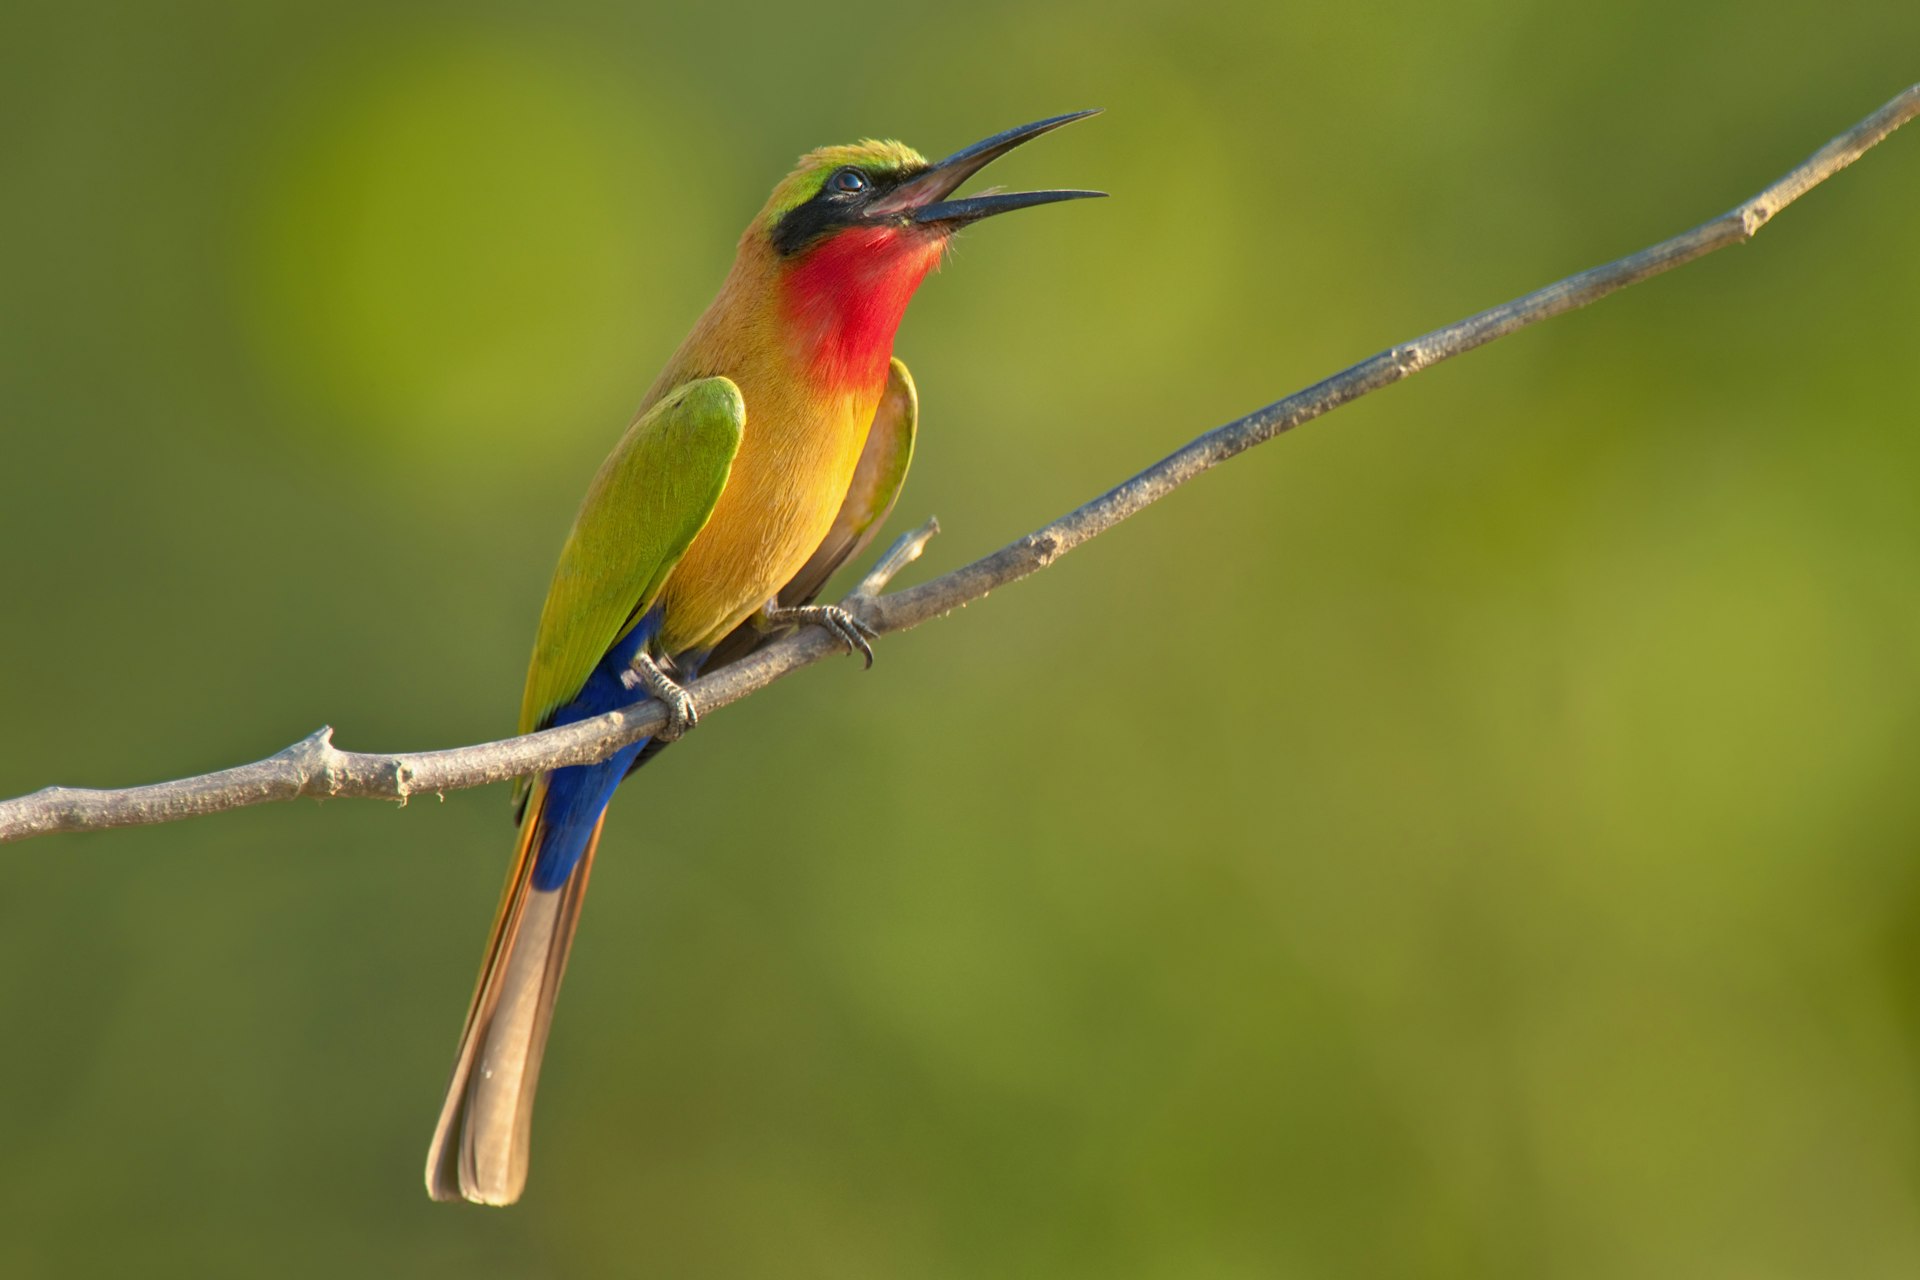 Red-throated bee-eater with green, red and yellow plumage perched on branch, Murops belocki, Mole National Park, Ghana